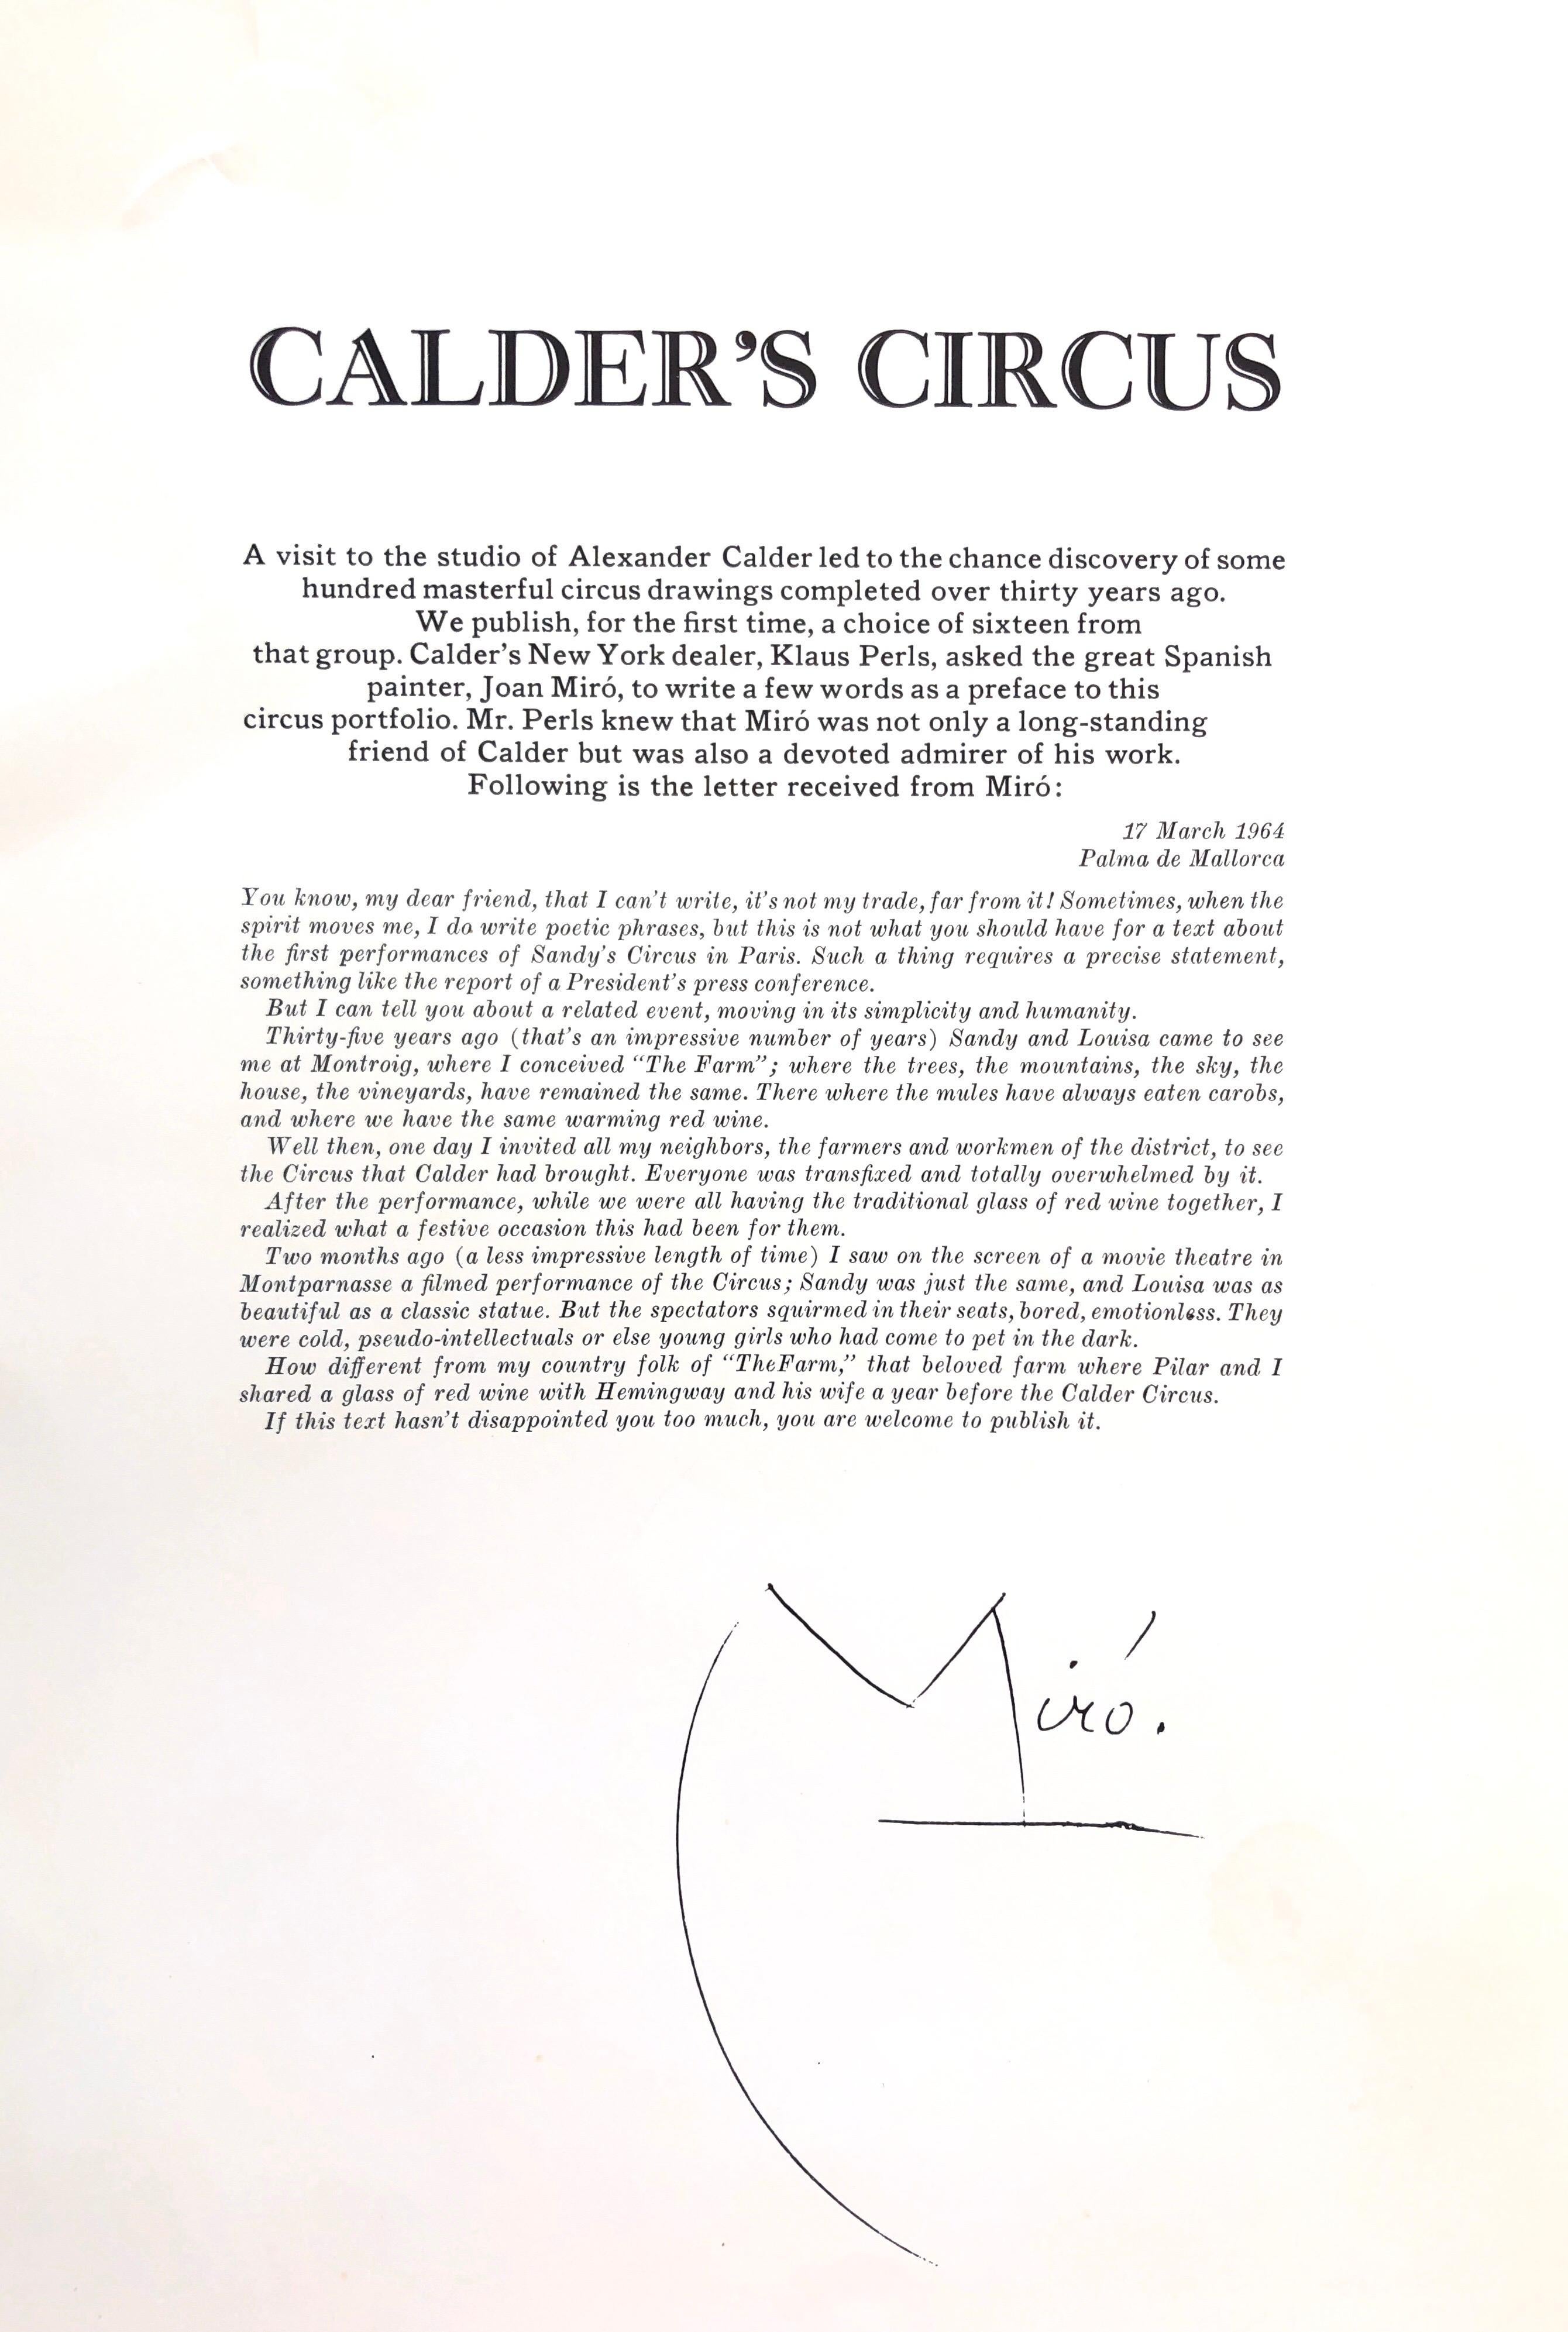 Alexander Calder Circus Reproduction Lithograph After a Drawing - Gray Figurative Print by (after) Alexander Calder